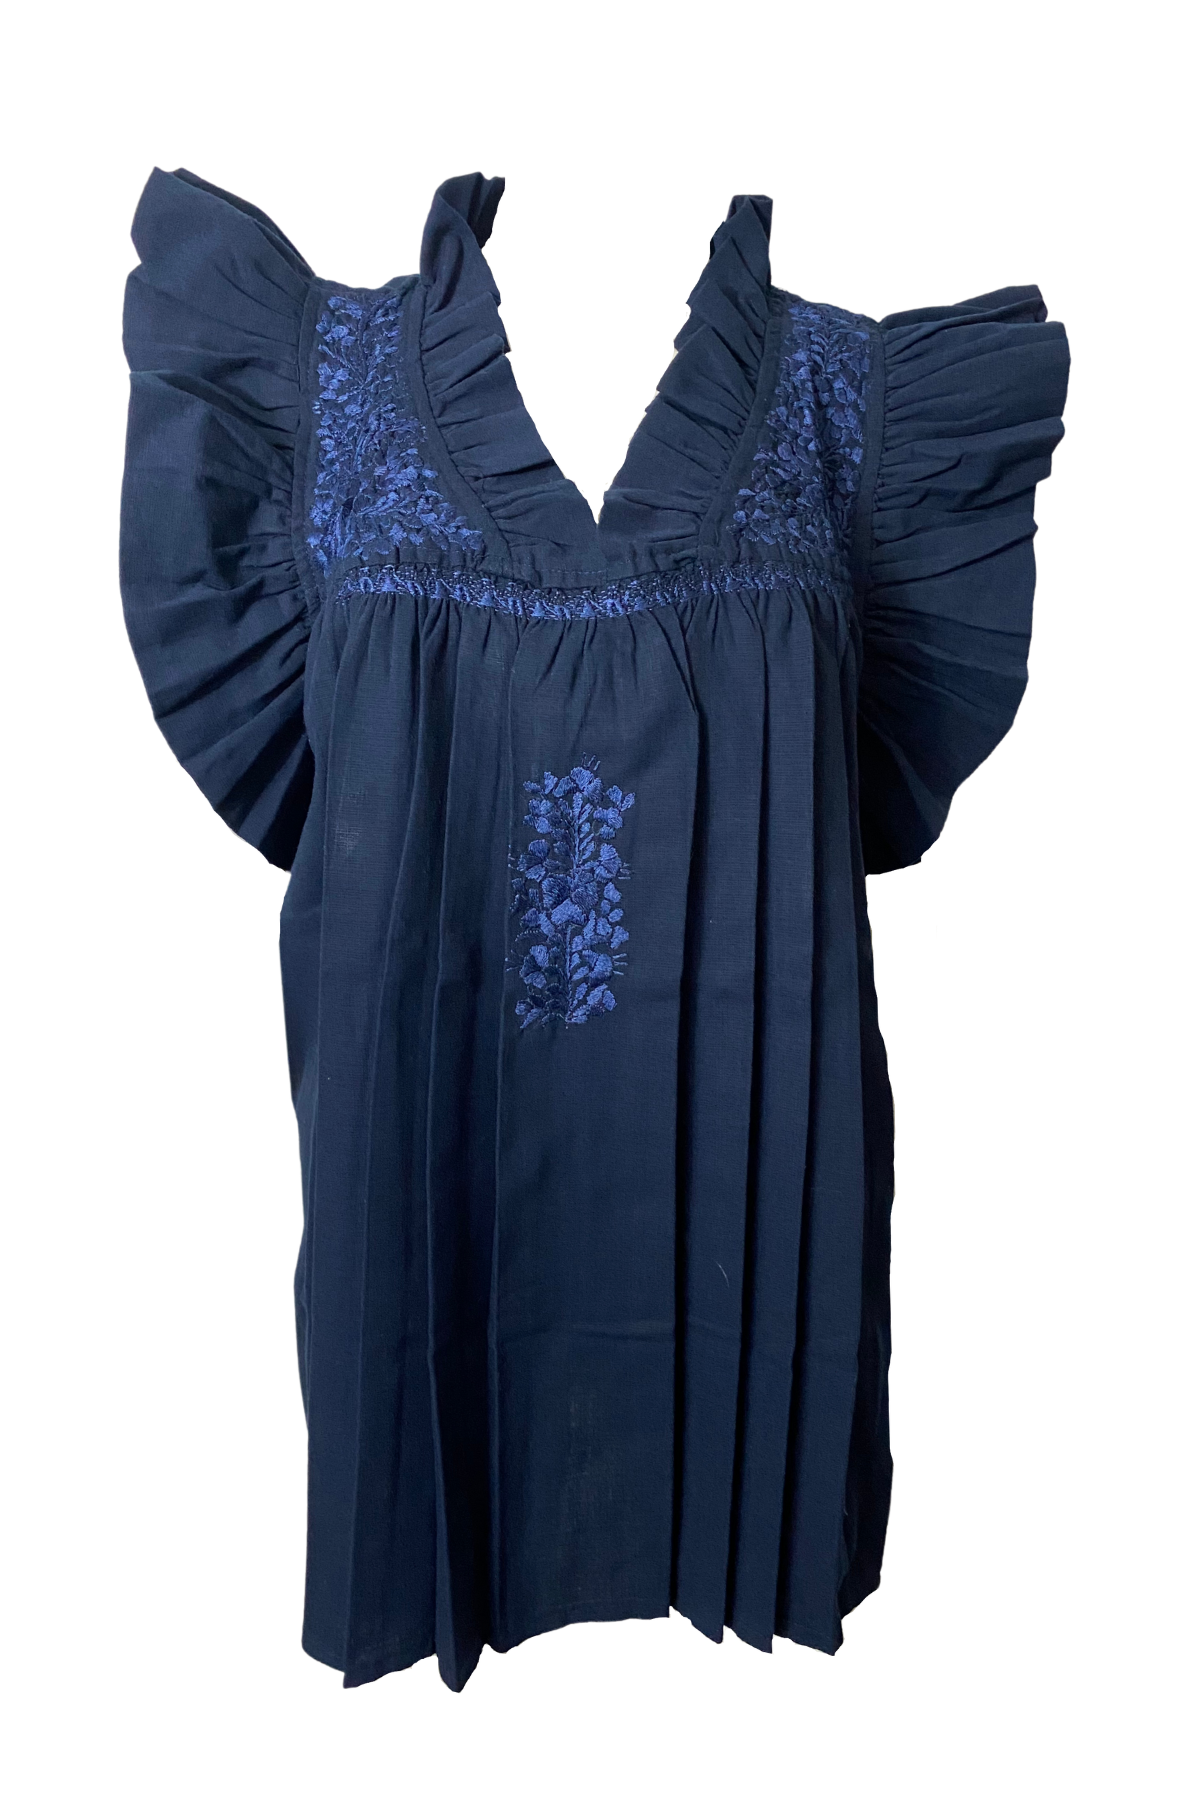 Navy blue blouse with blue embroidery